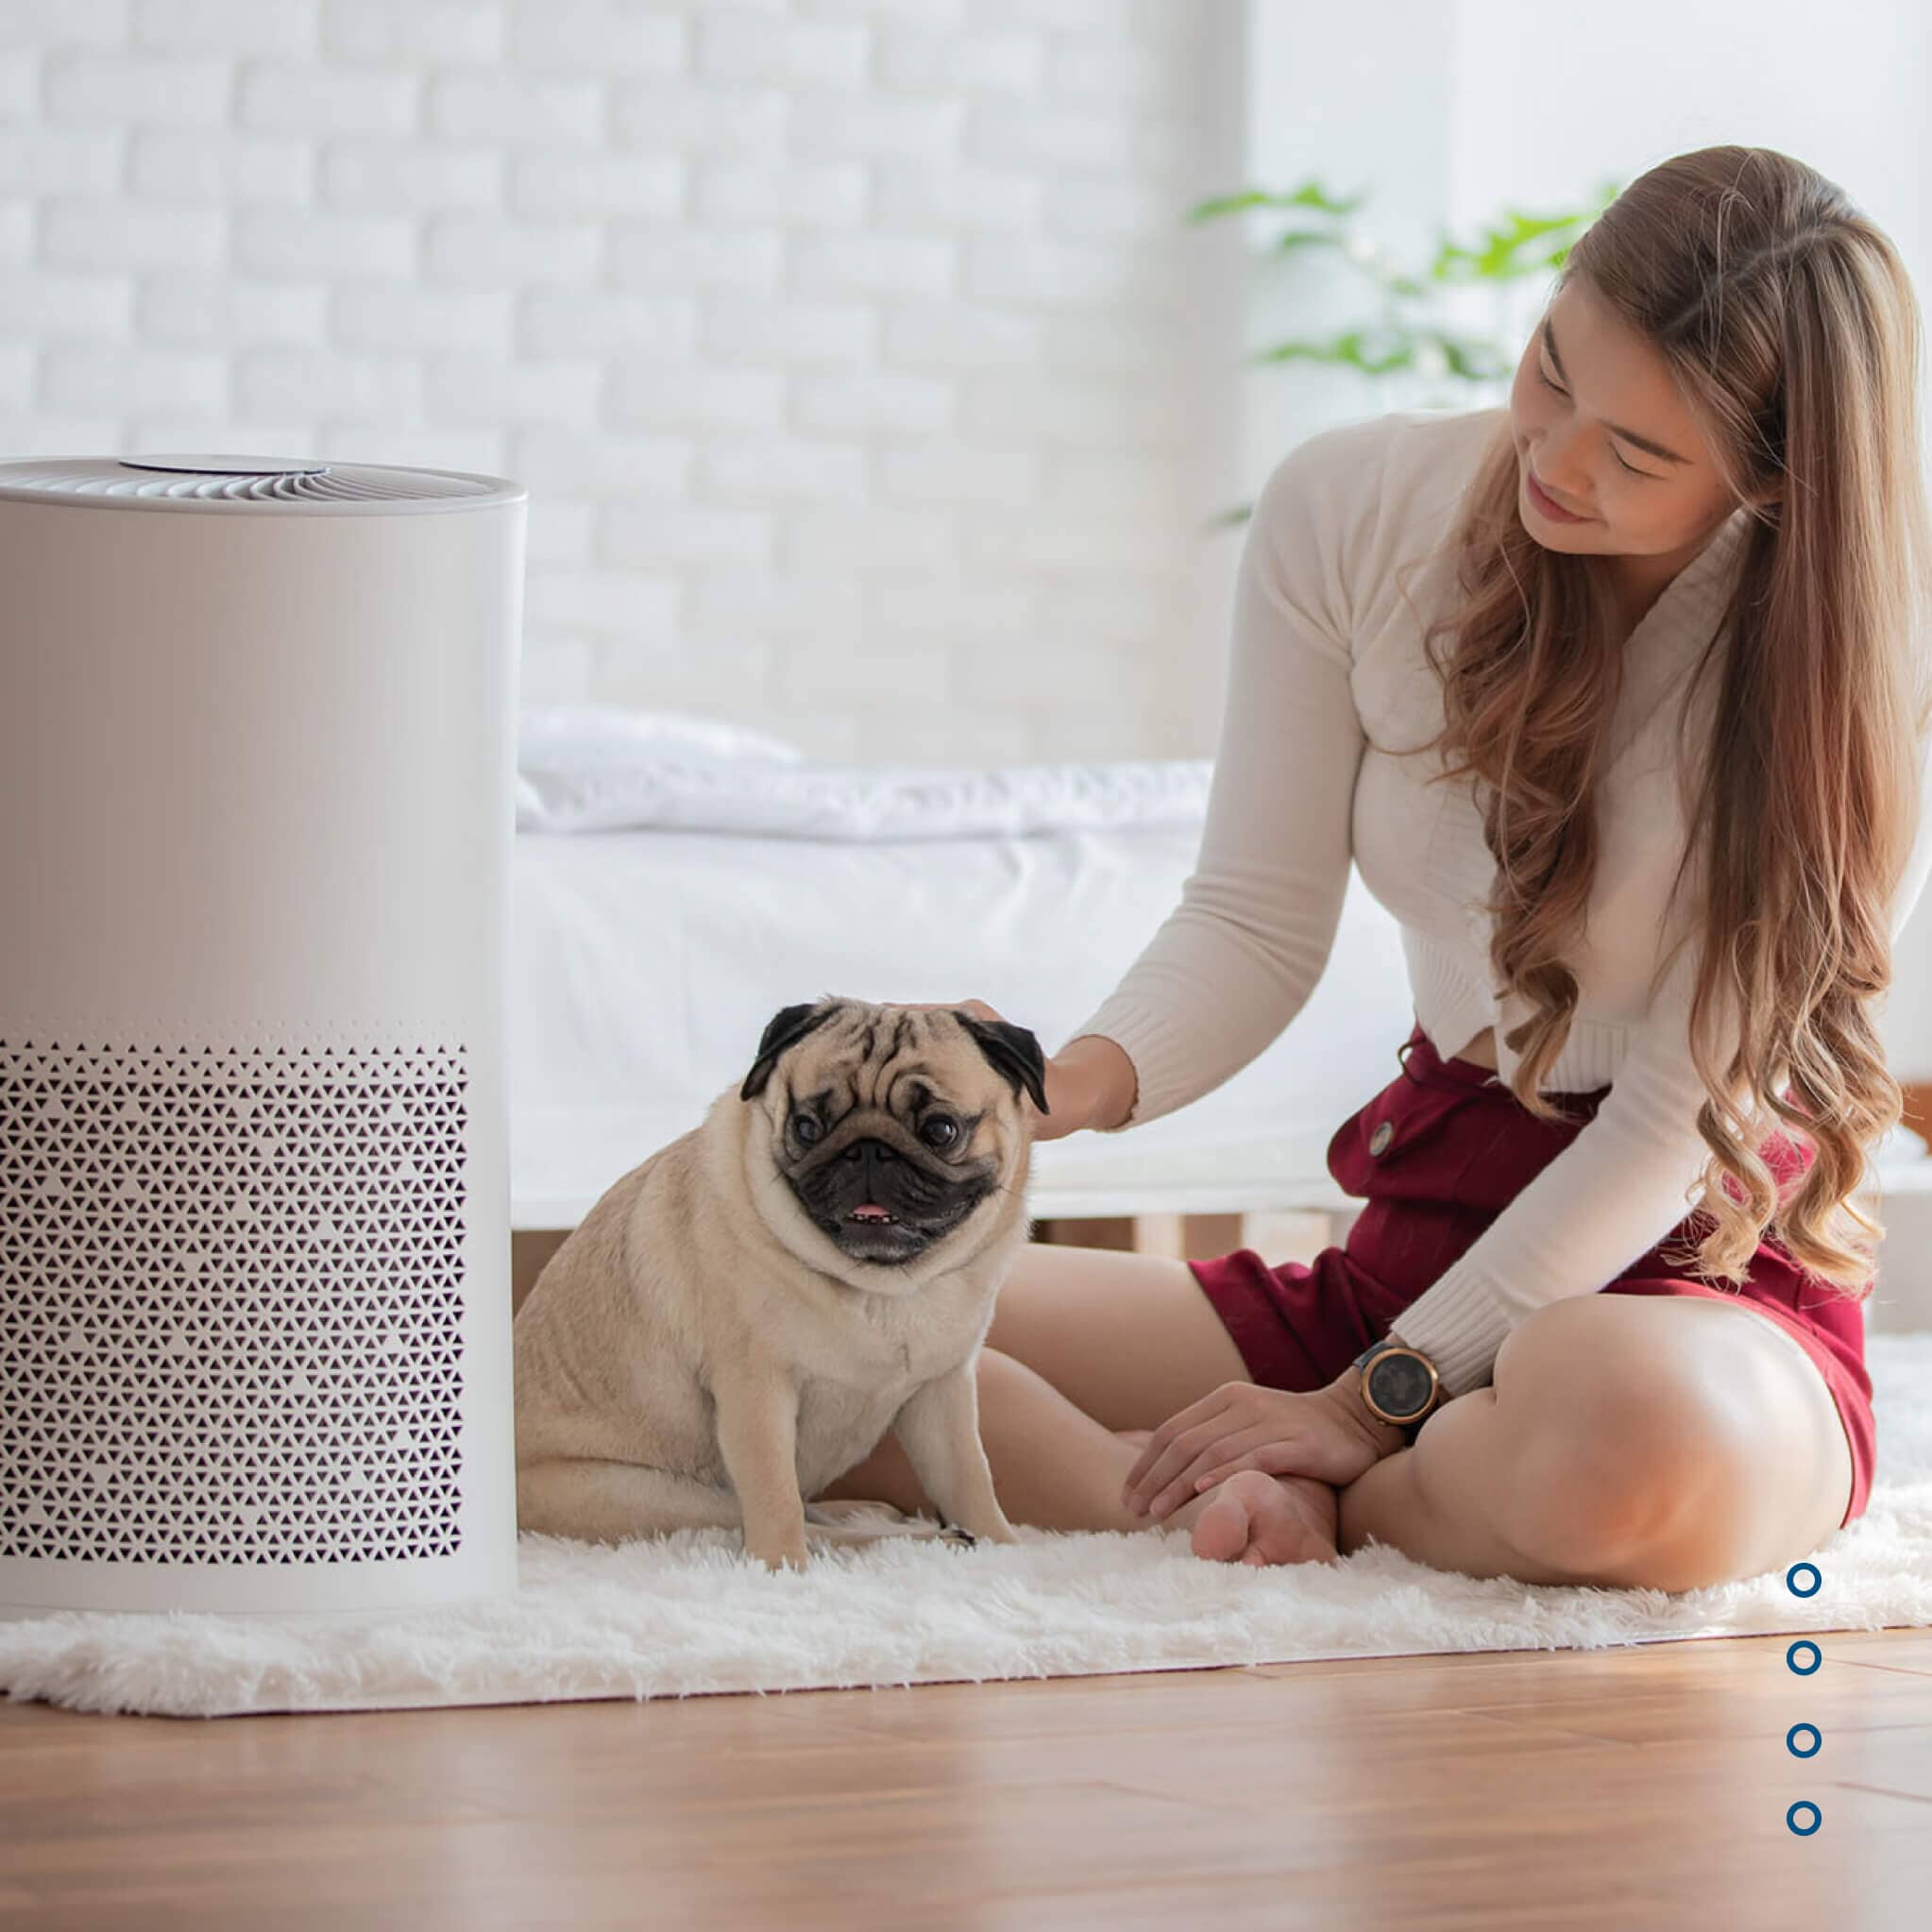 We are indoor air quality experts and are committed to providing you with the highest quality air purification products available.